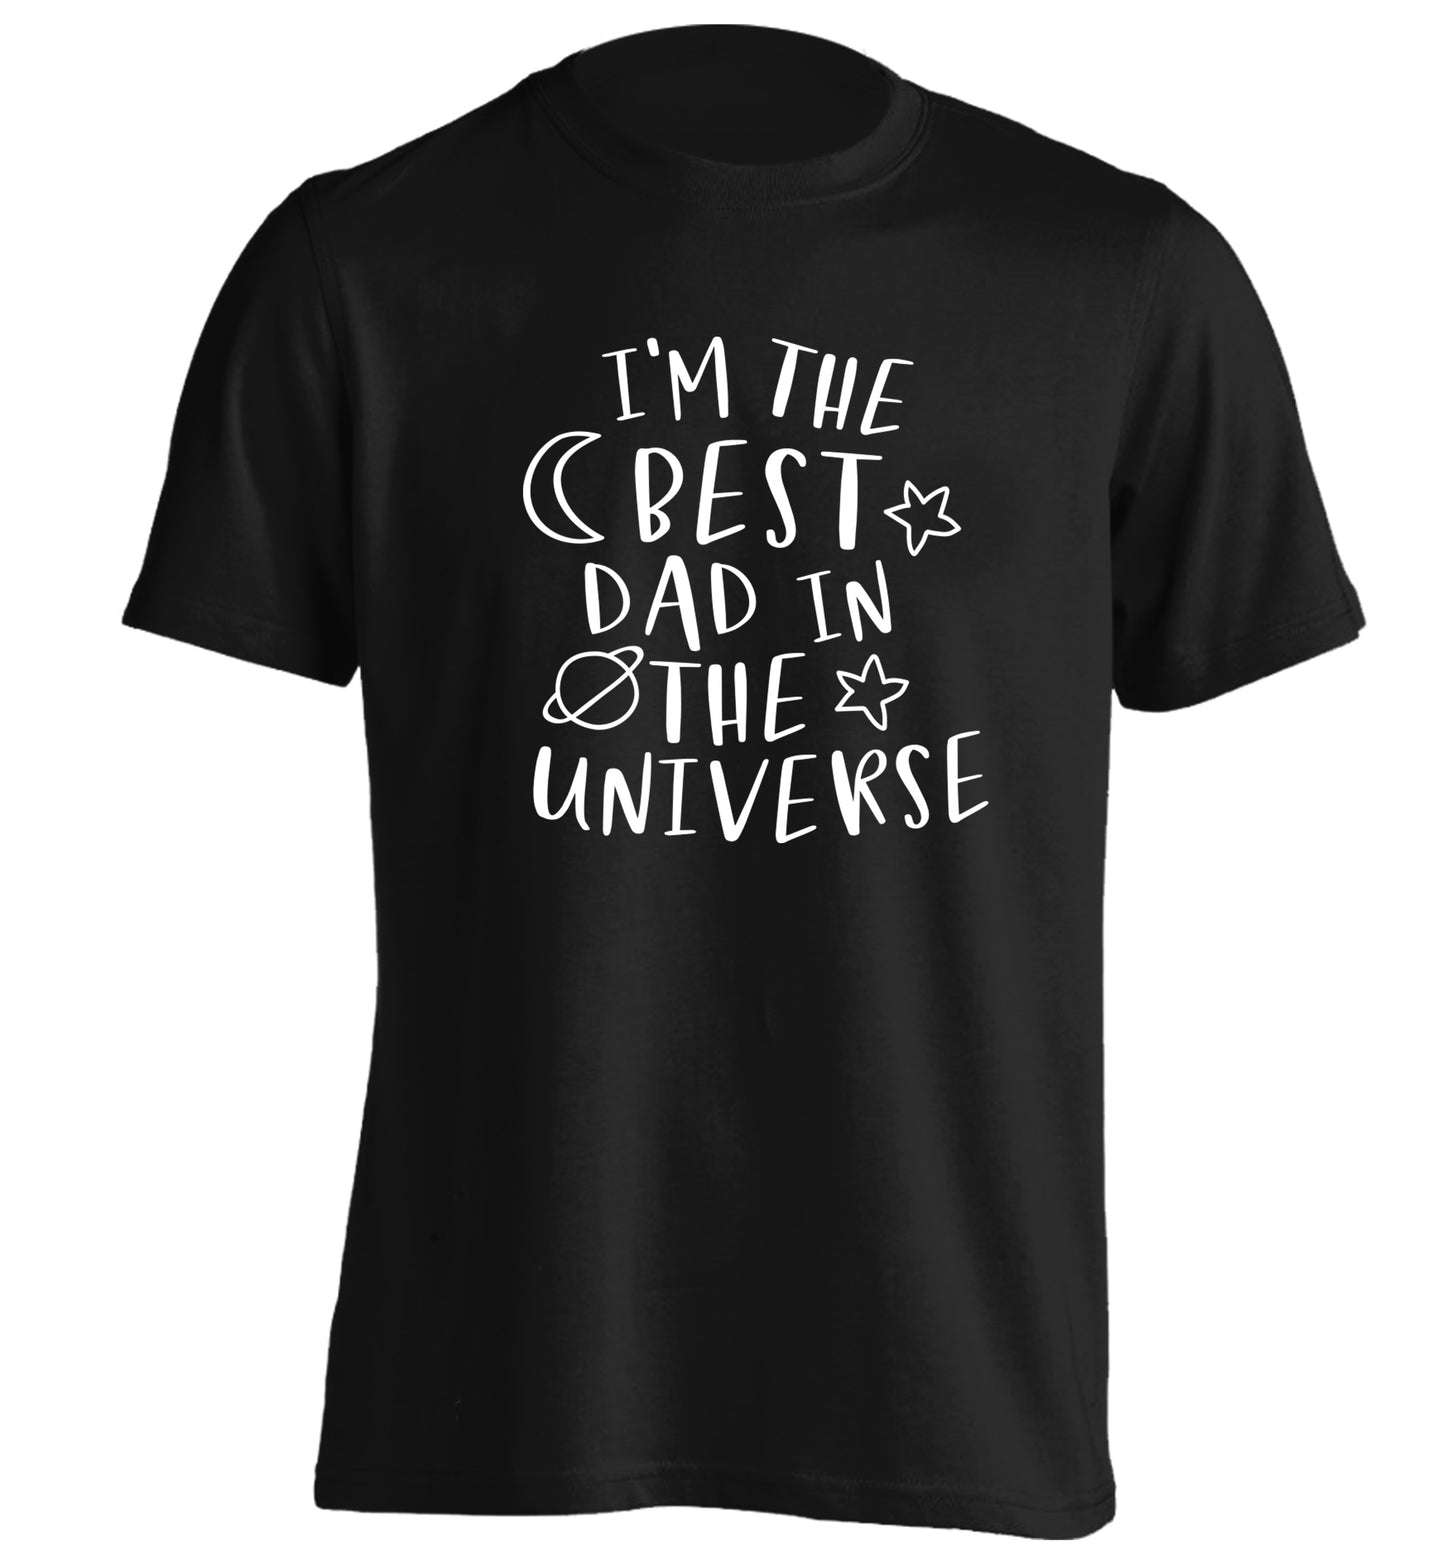 I'm the best dad in the universe adults unisex black Tshirt 2XL